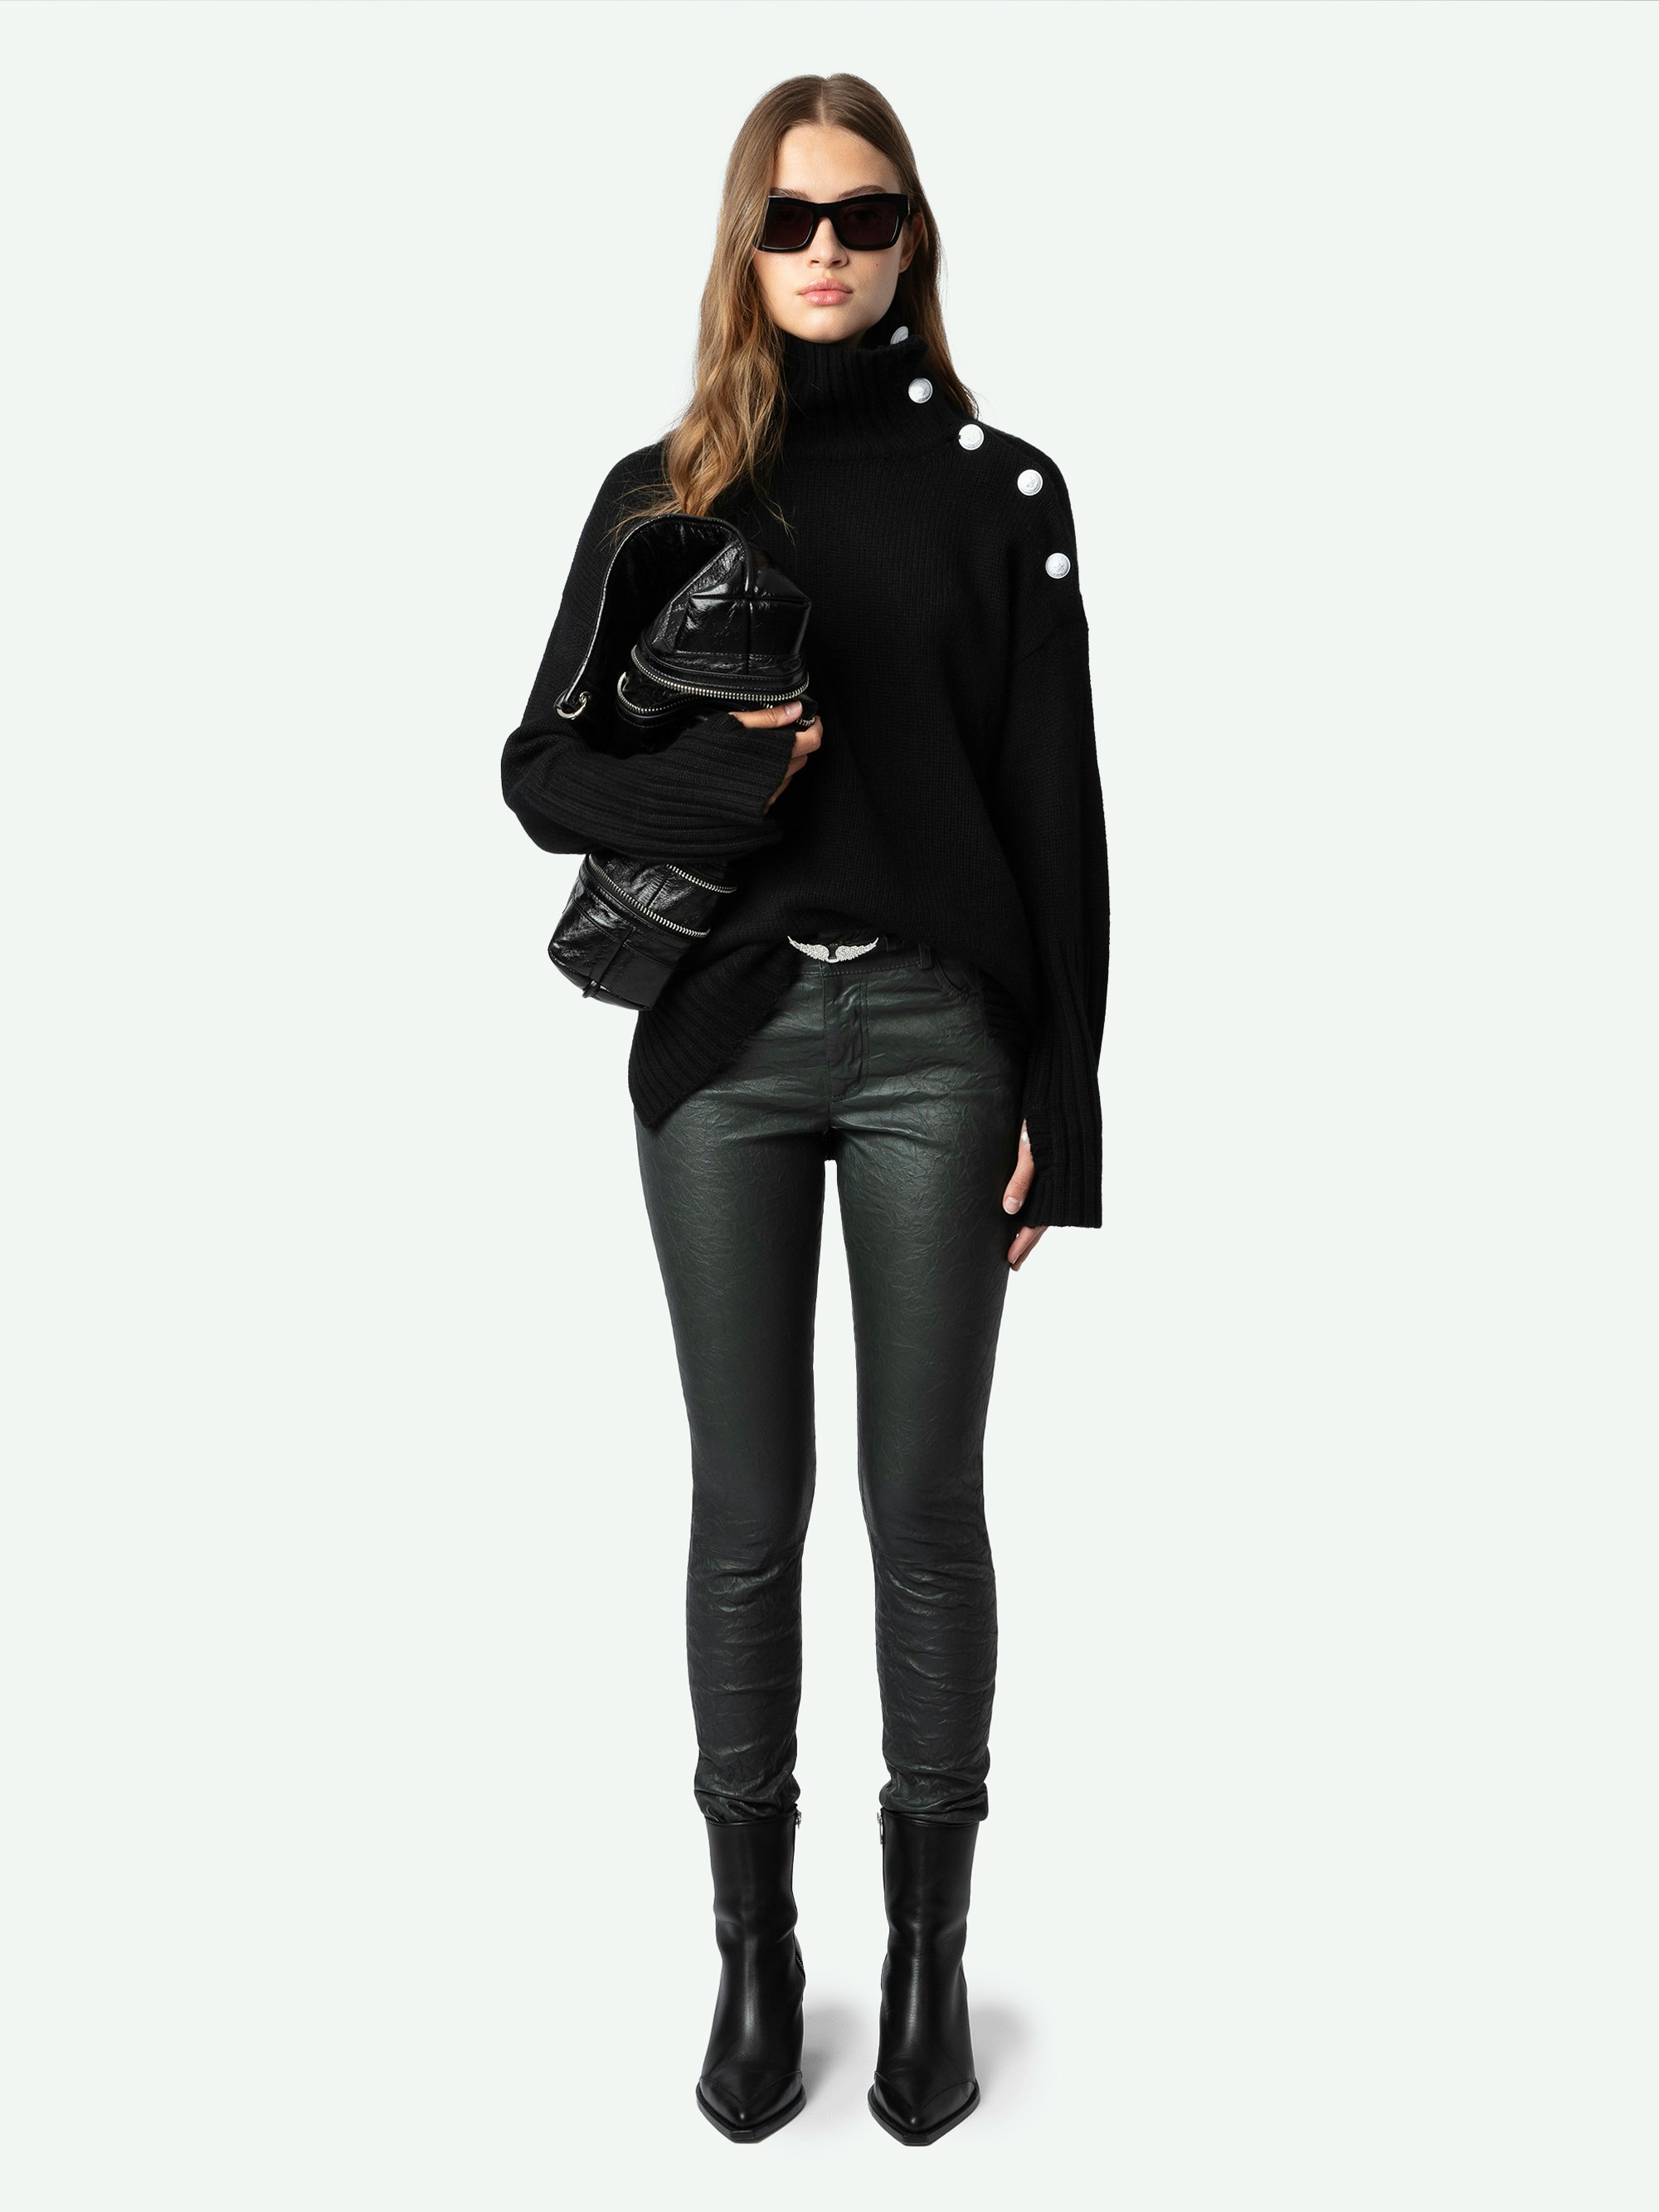 Phlame Crinkled Leather Trousers - Dark green crinkled leather trousers with pockets.